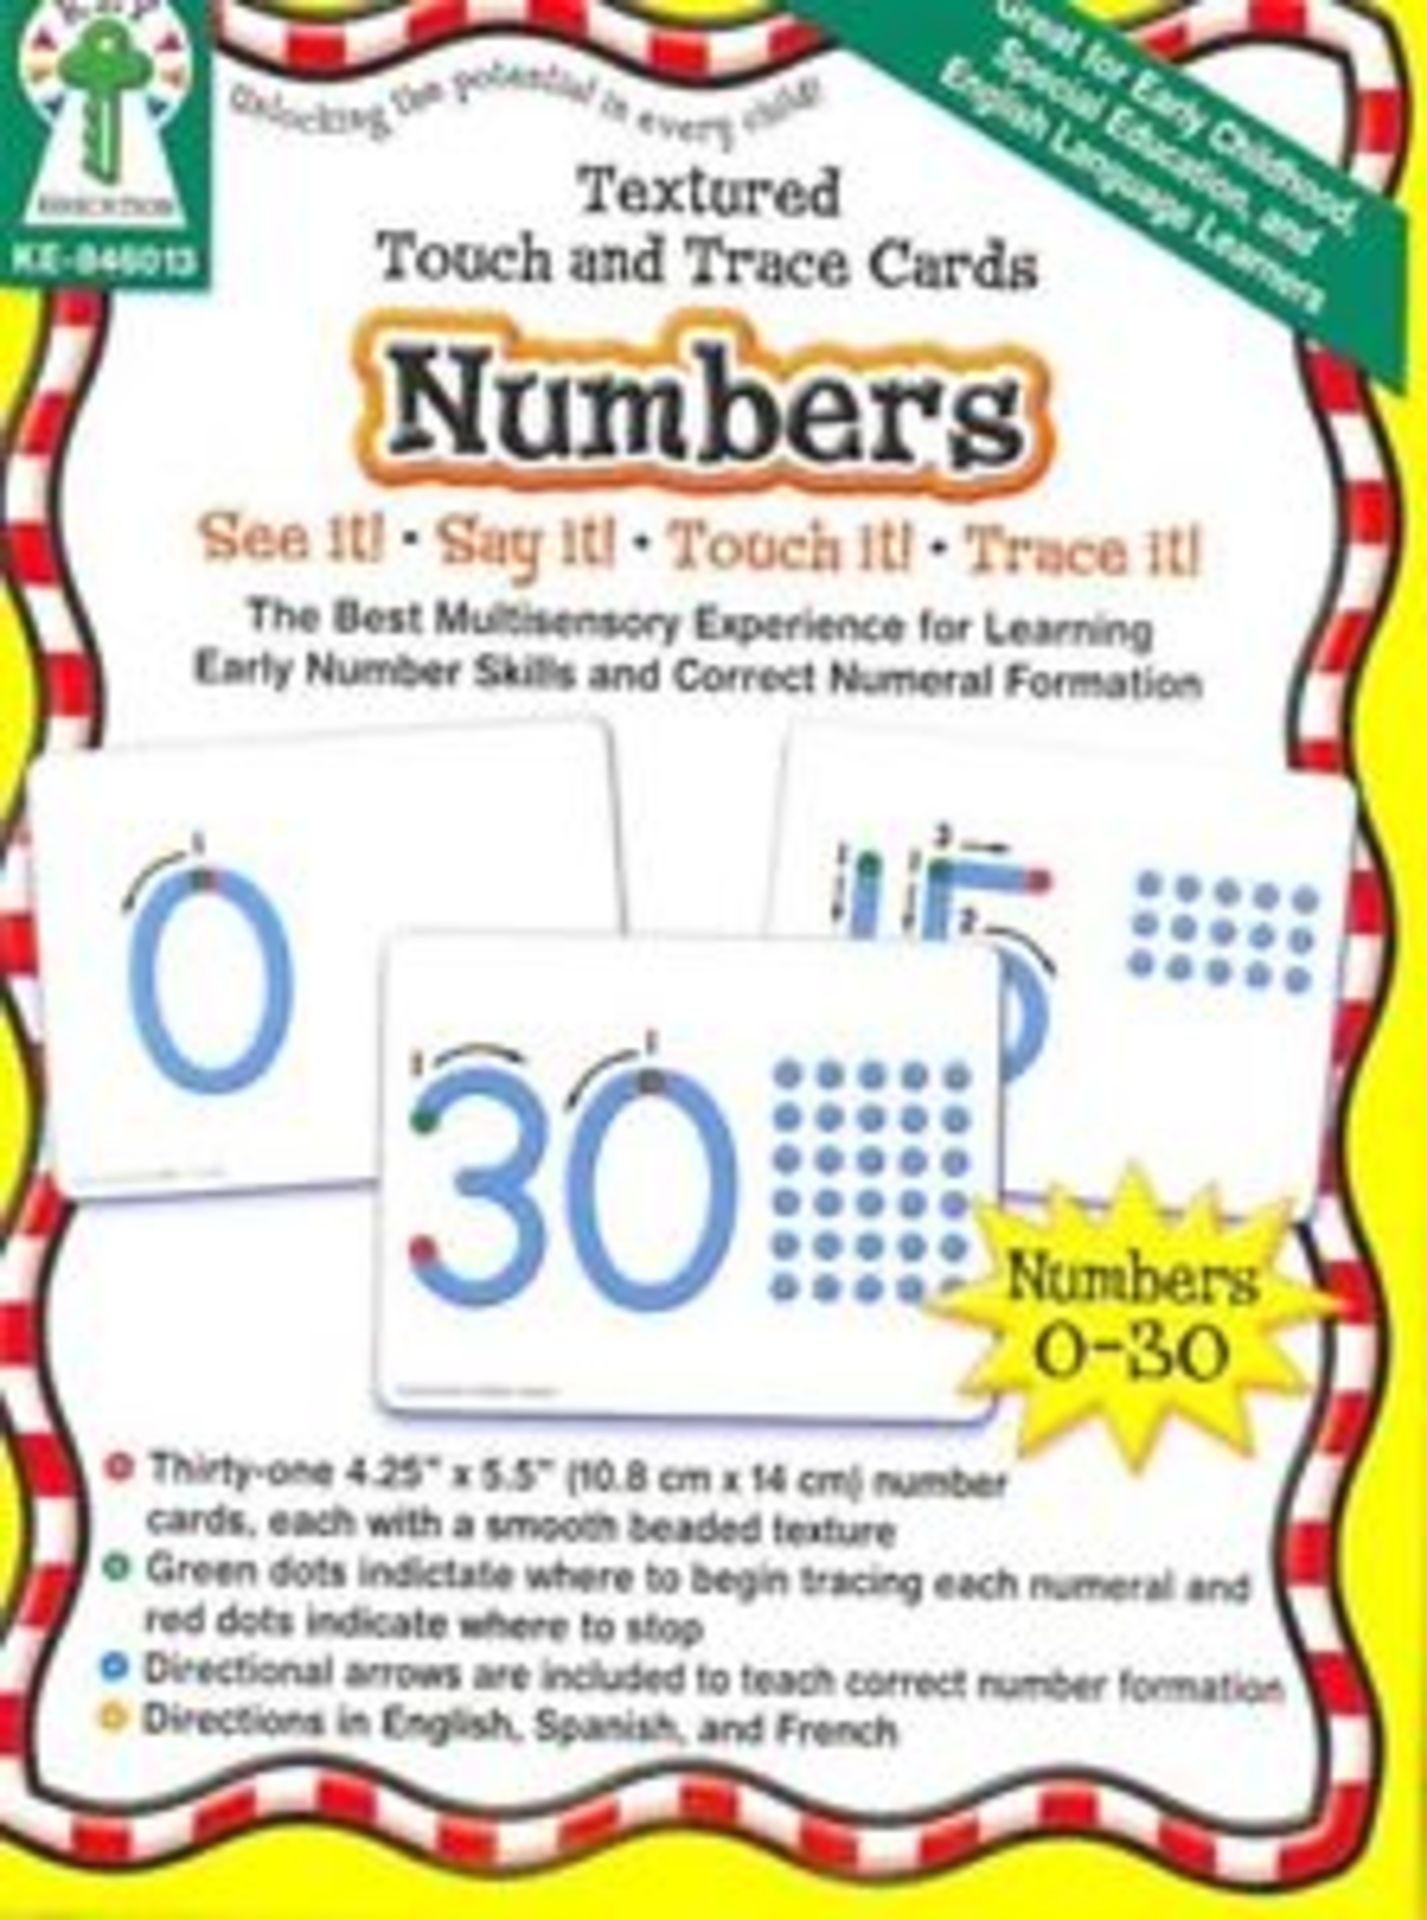 V Brand New Key Education Textured Touch & Trace Cards-Numbers ISP £20.09 (Ebay)